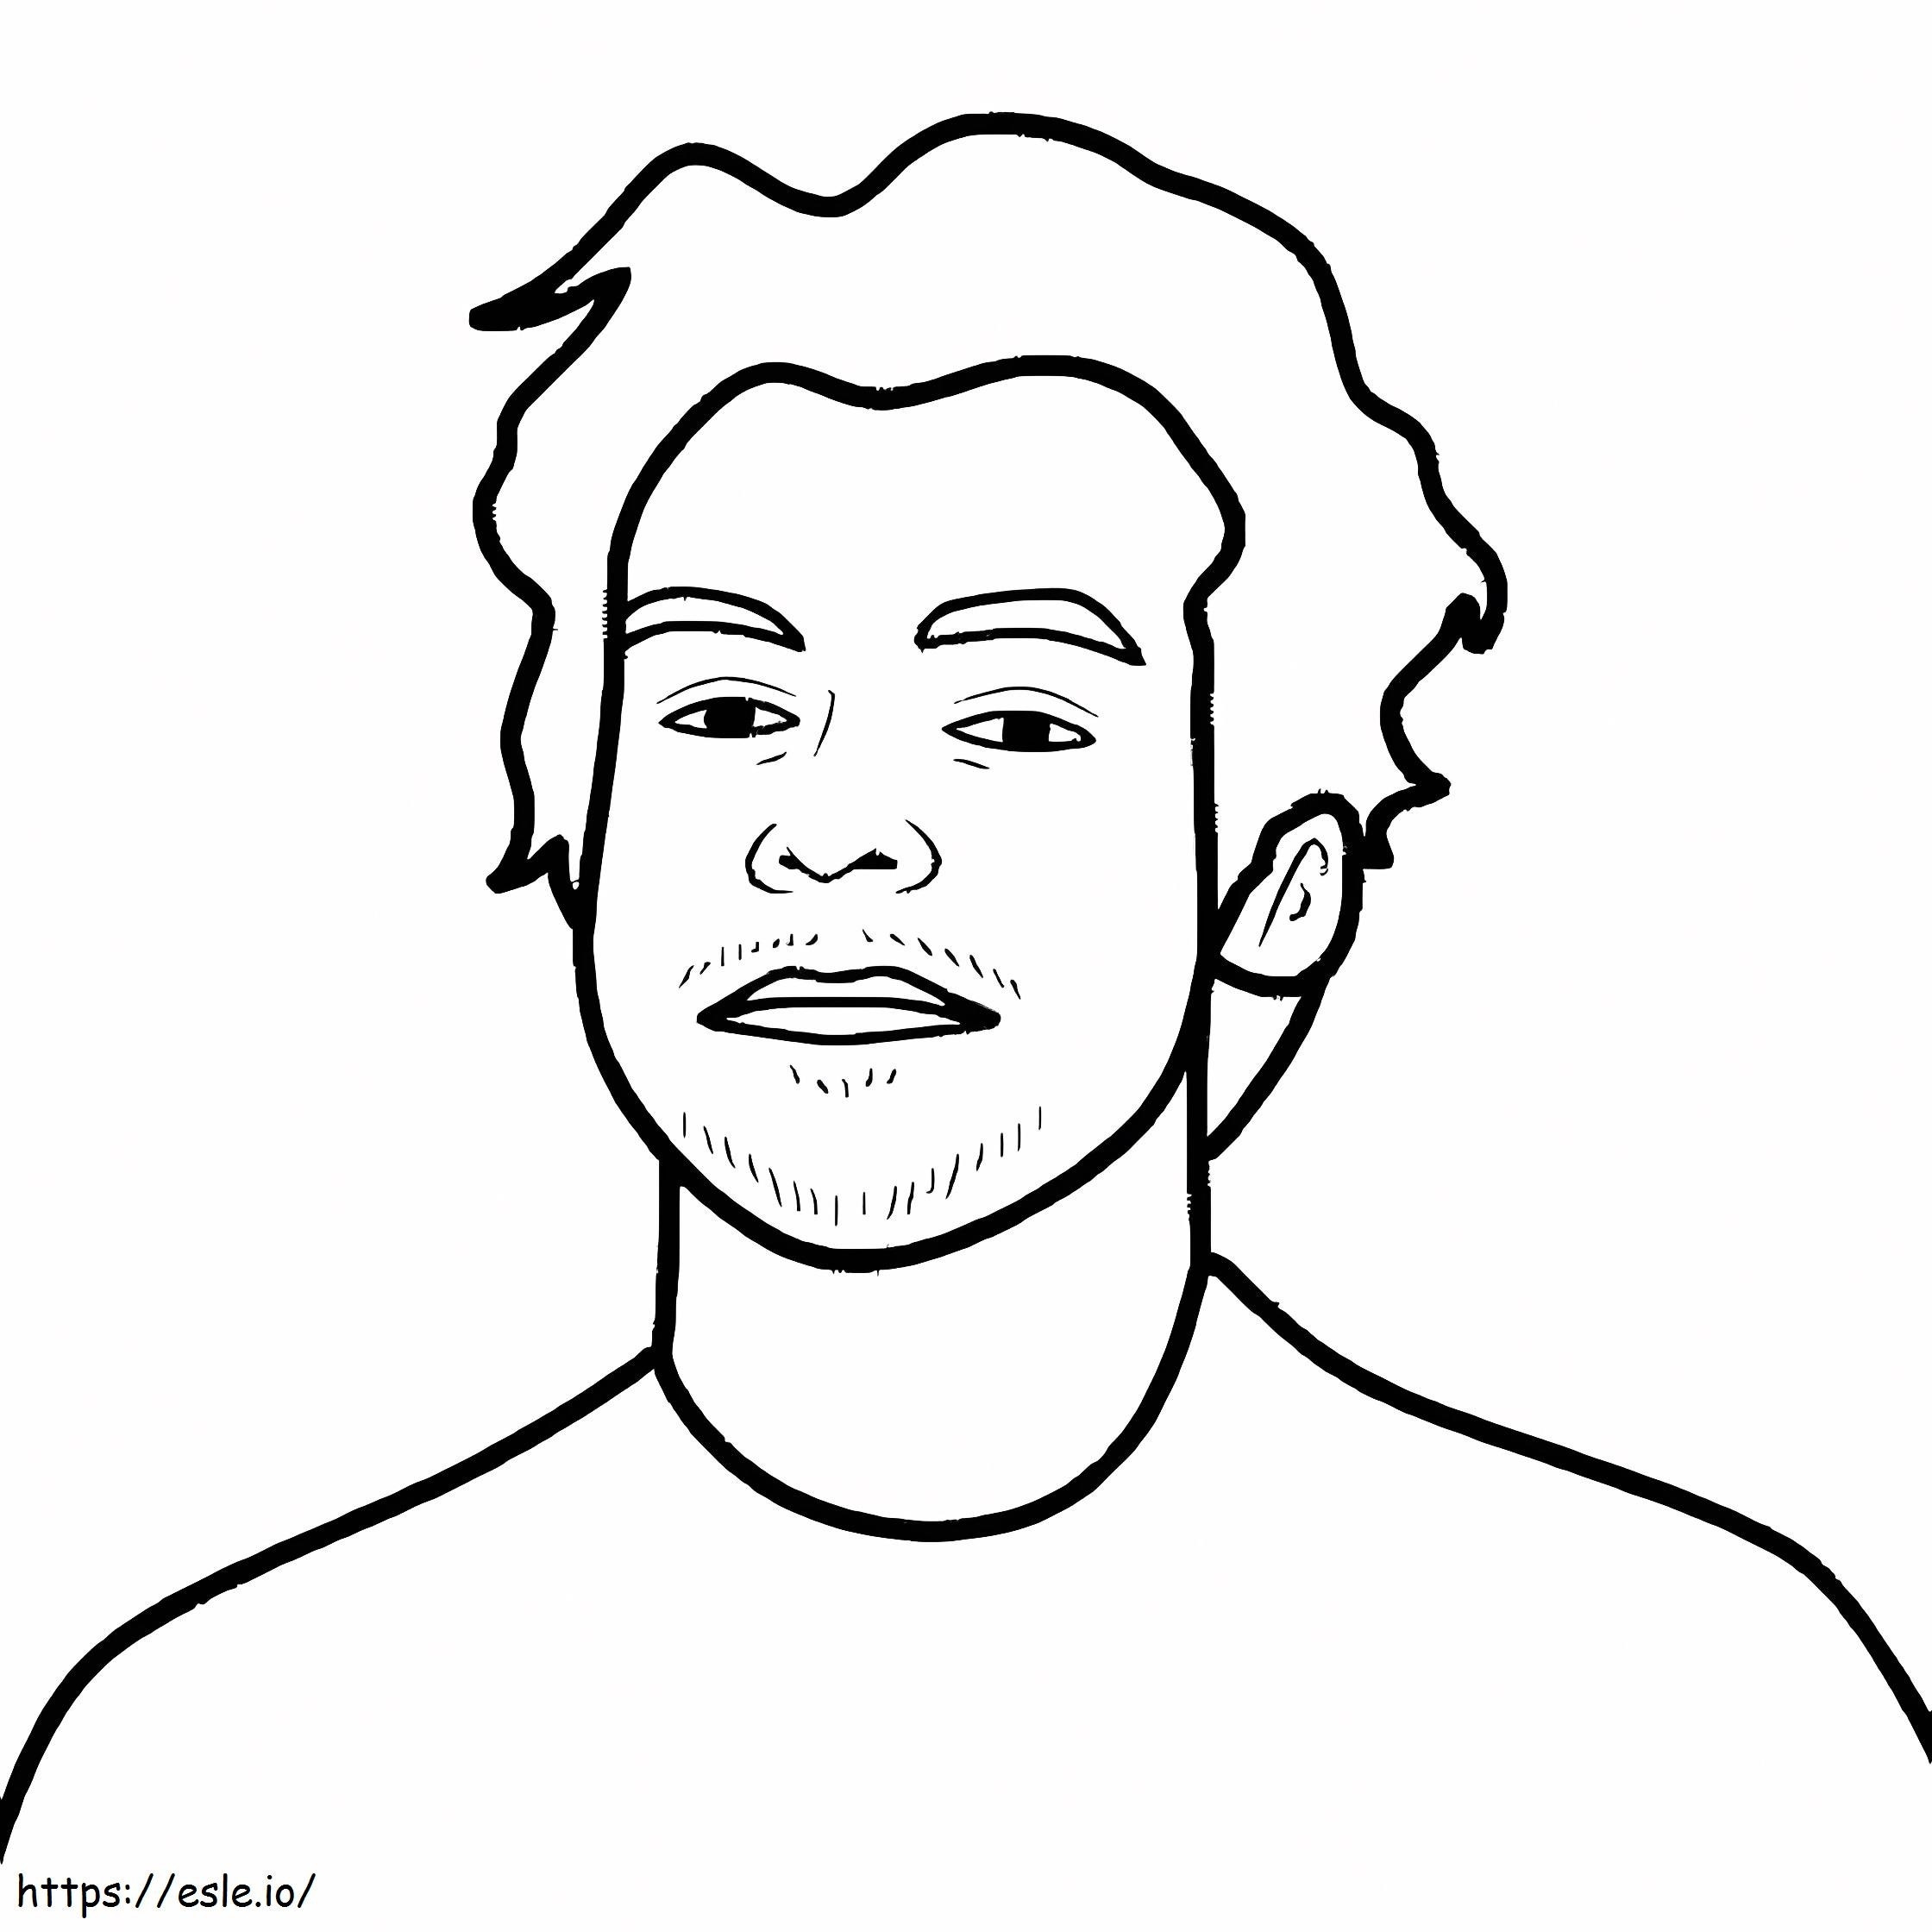 Printable Harry Styles coloring page